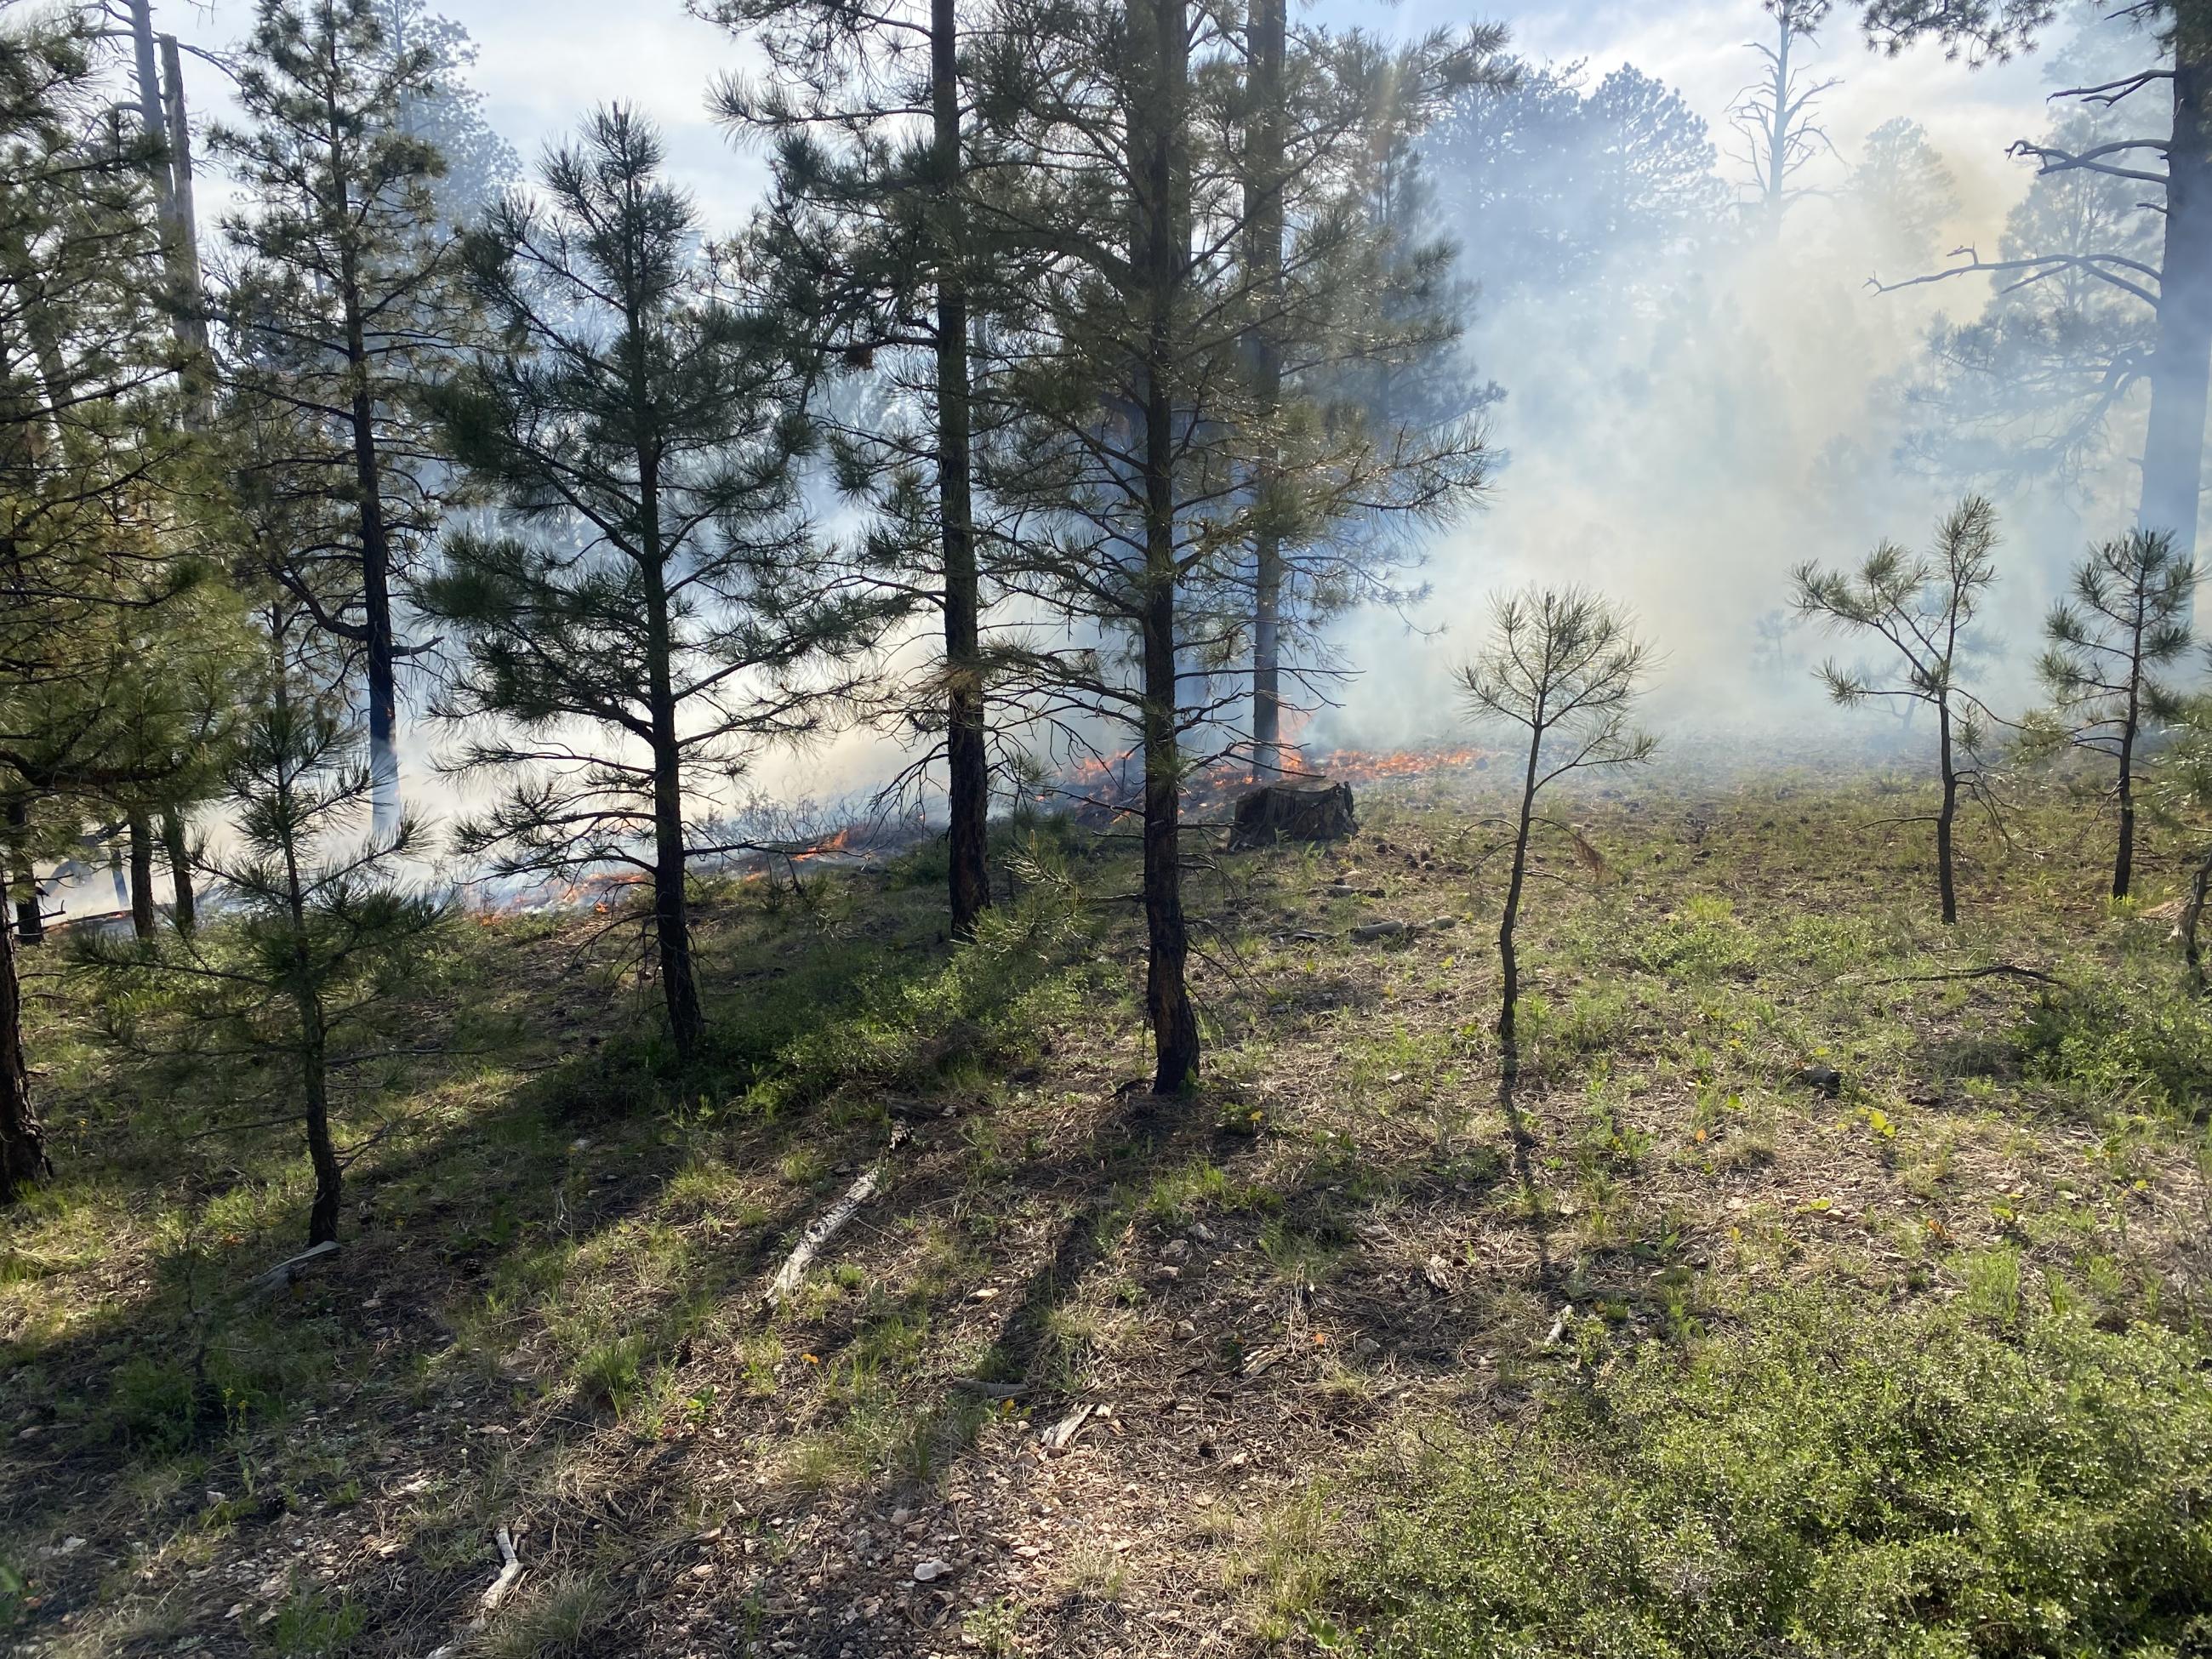 A line of fire creeping through pine needles on the forest floor with light smoke in the background and small pine trees and green grasses in the foreground.